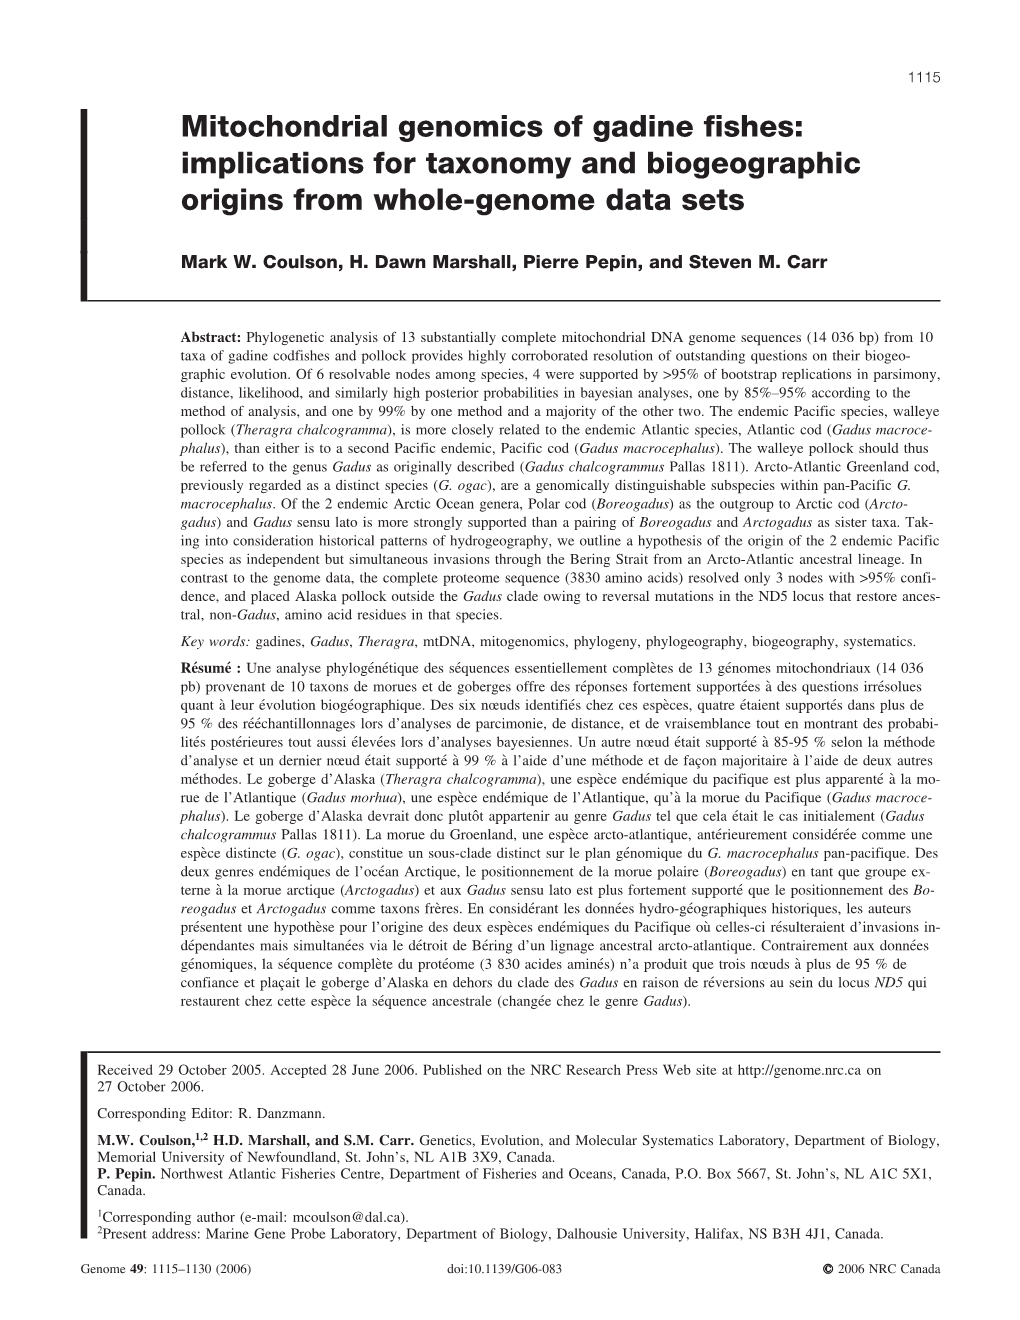 Mitochondrial Genomics of Gadine Fishes: Implications for Taxonomy and Biogeographic Origins from Whole-Genome Data Sets